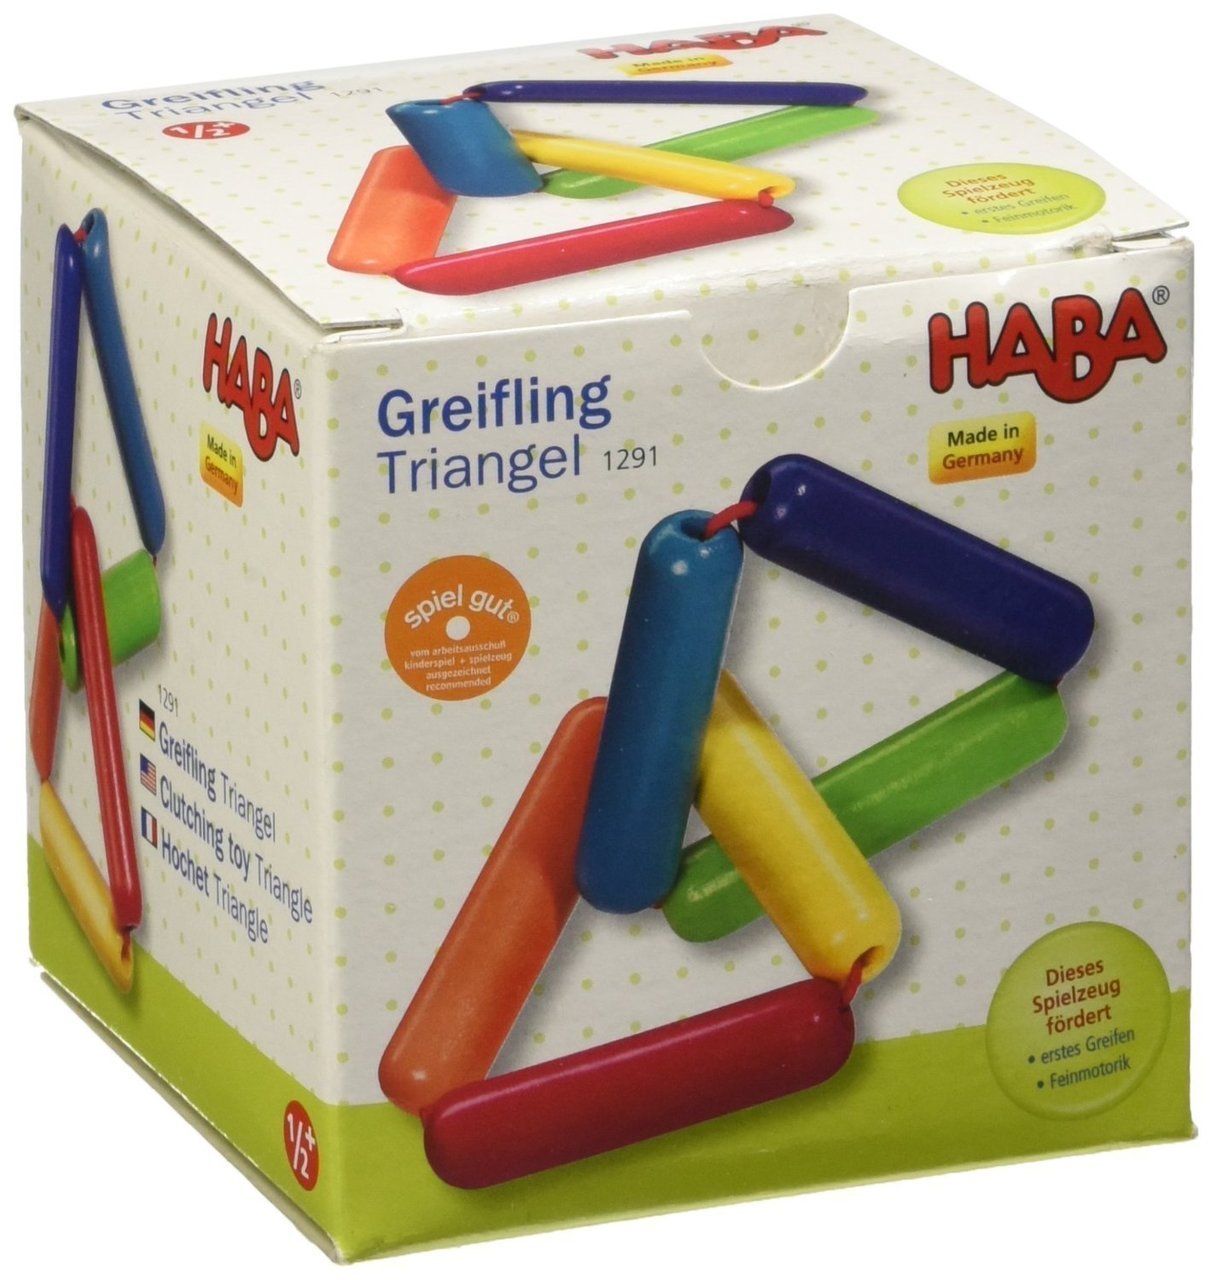 HABA Triangle Clutching Toy - Wood Wood Toys Canada's Favourite Montessori Toy Store